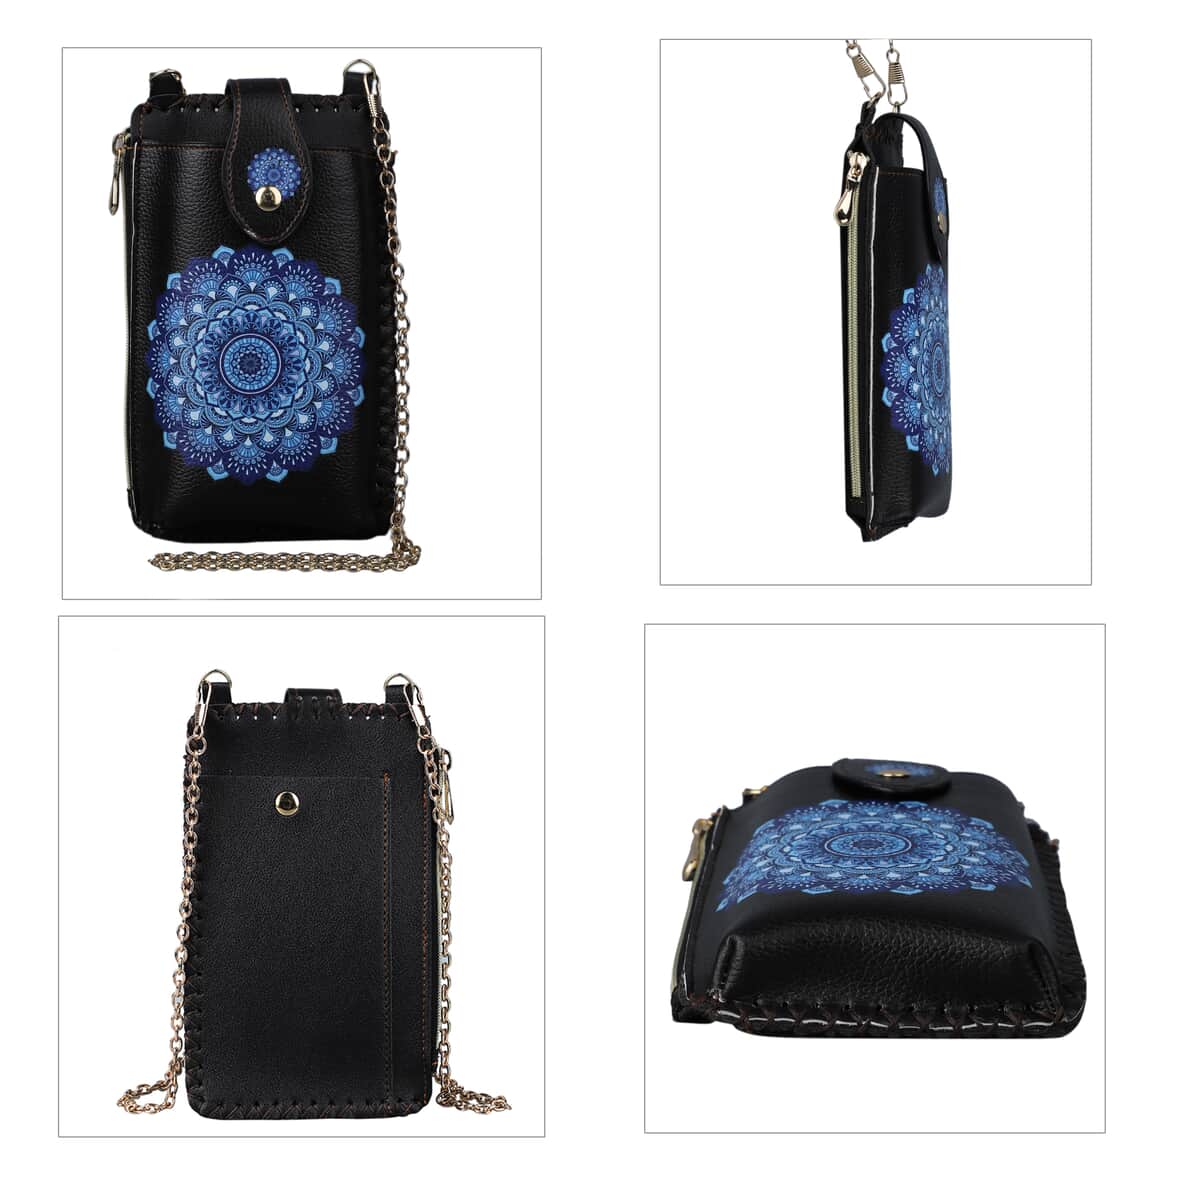 HongKong Closeout Stylish and Classic Paper Cuts Pattern Cell Phone Bag with Chain Shoulder Strap - Black and Blue image number 3